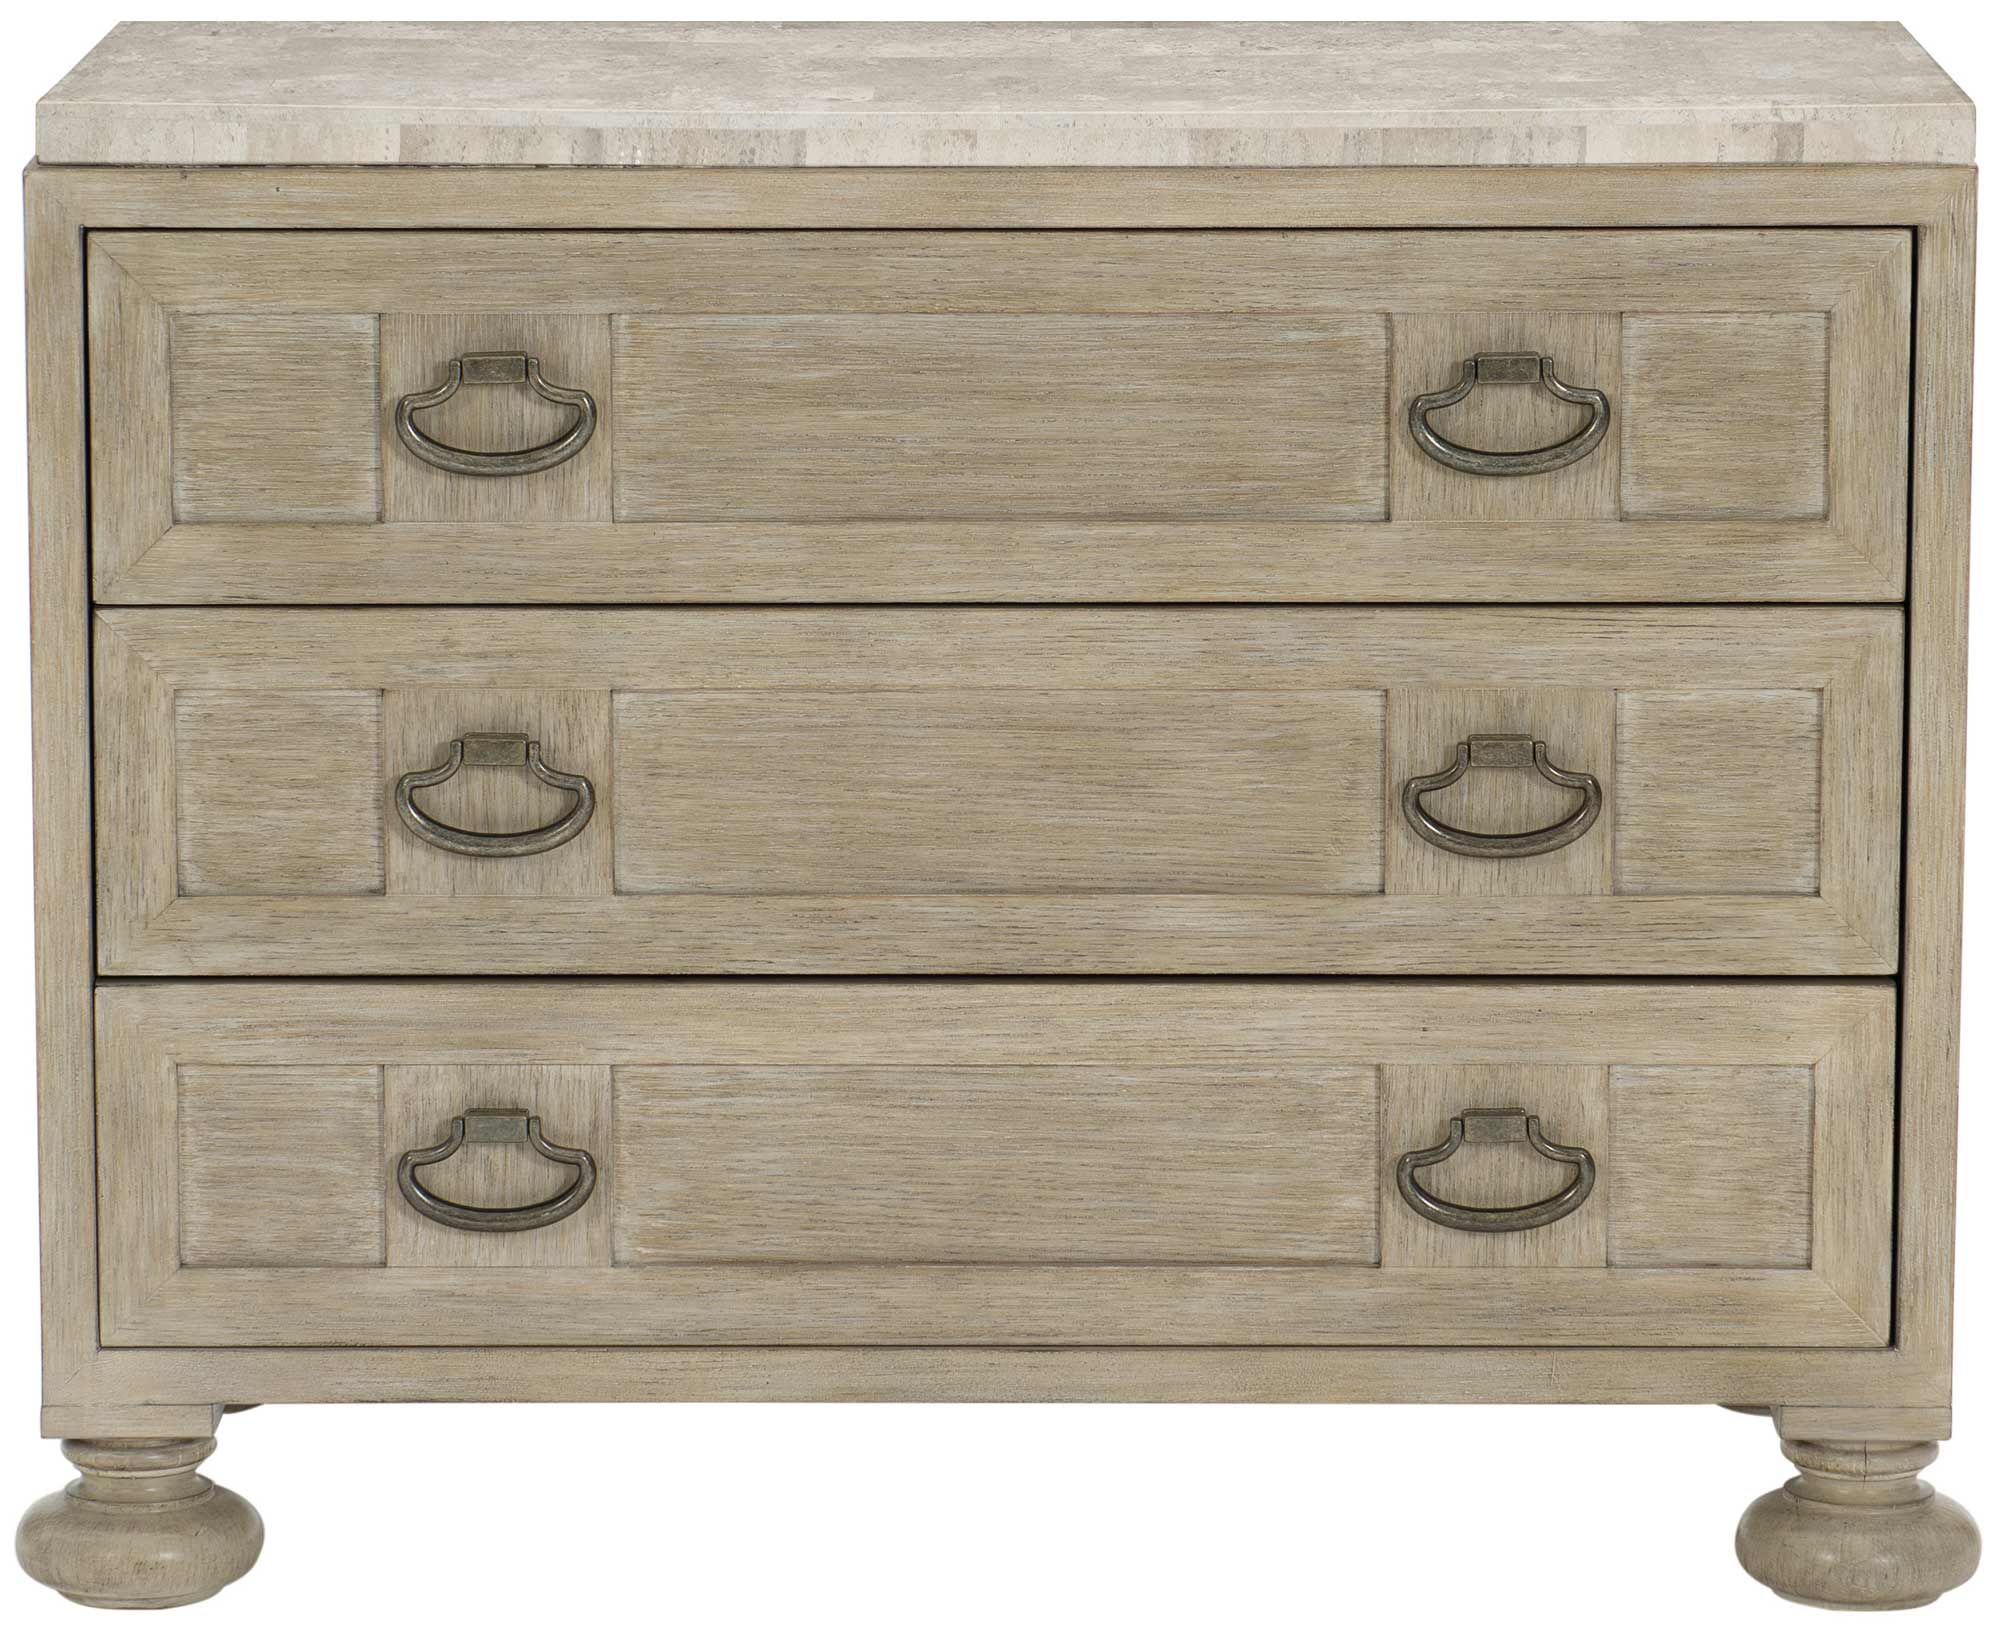 Santa Barbara Bachelor's Chest with Stone Top